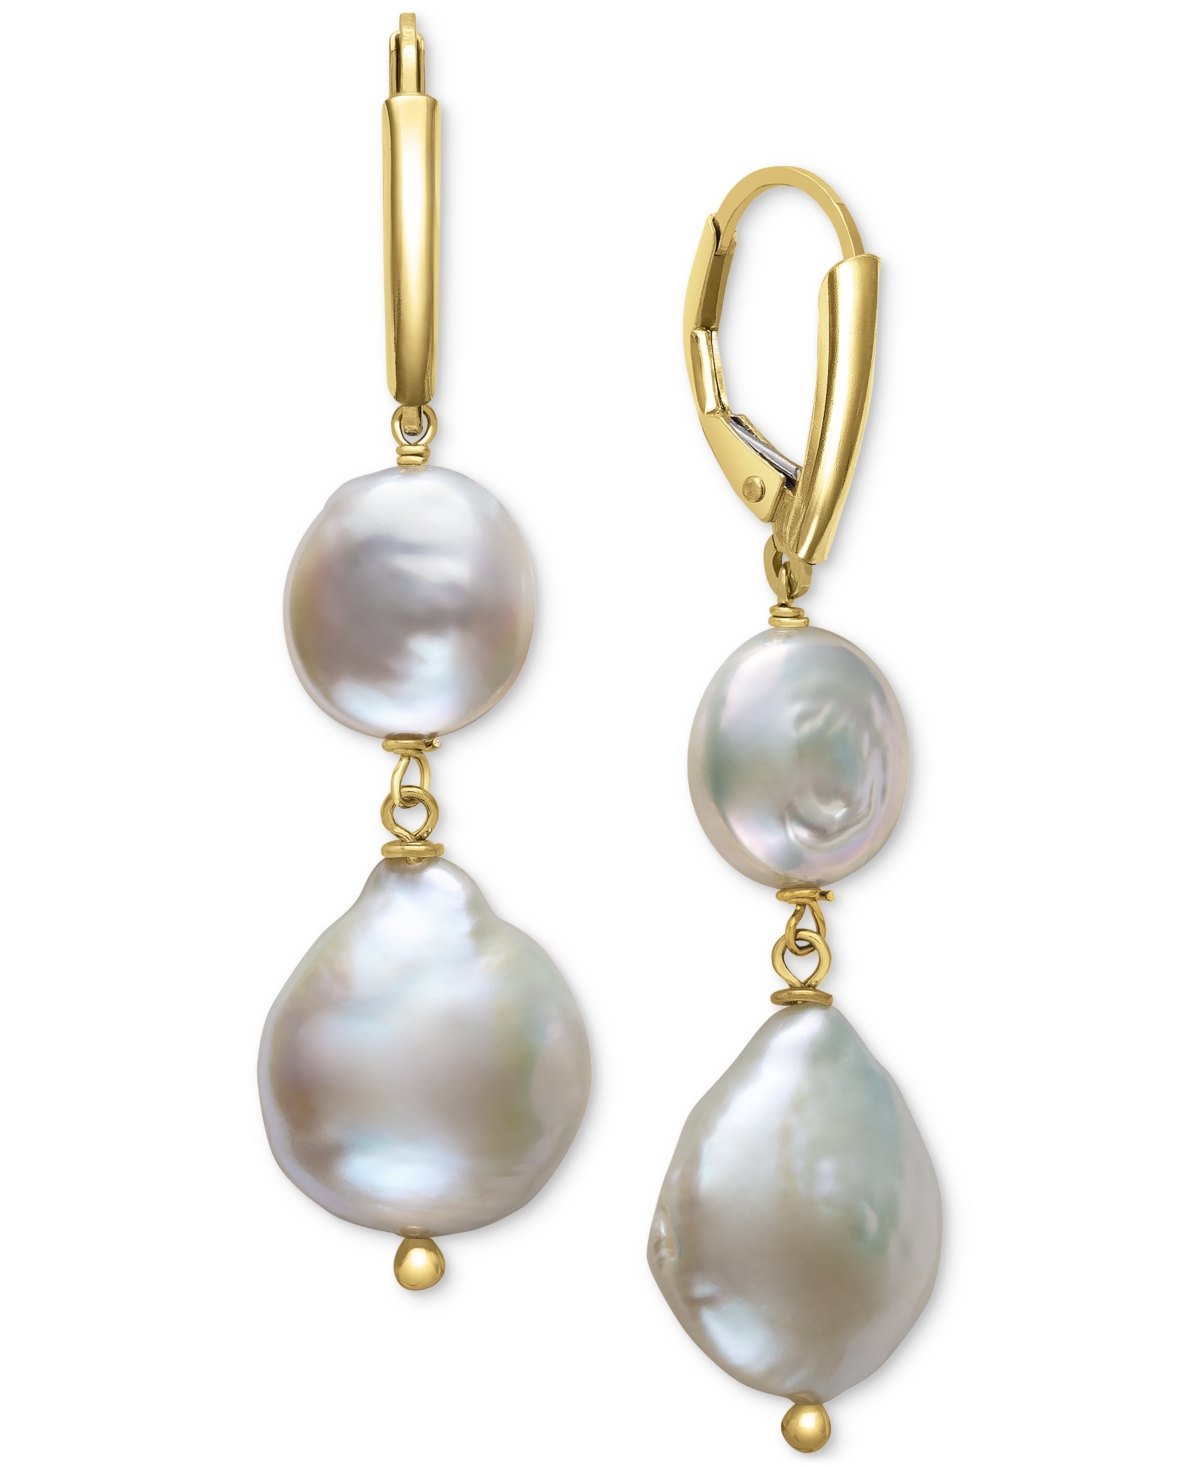 Cultured Freshwater Coin & Baroque Pearl (9-10mm & 12-13mm) Drop Earrings in 14k Gold-Plated Sterling Silver - Gold Over Sterling Silver